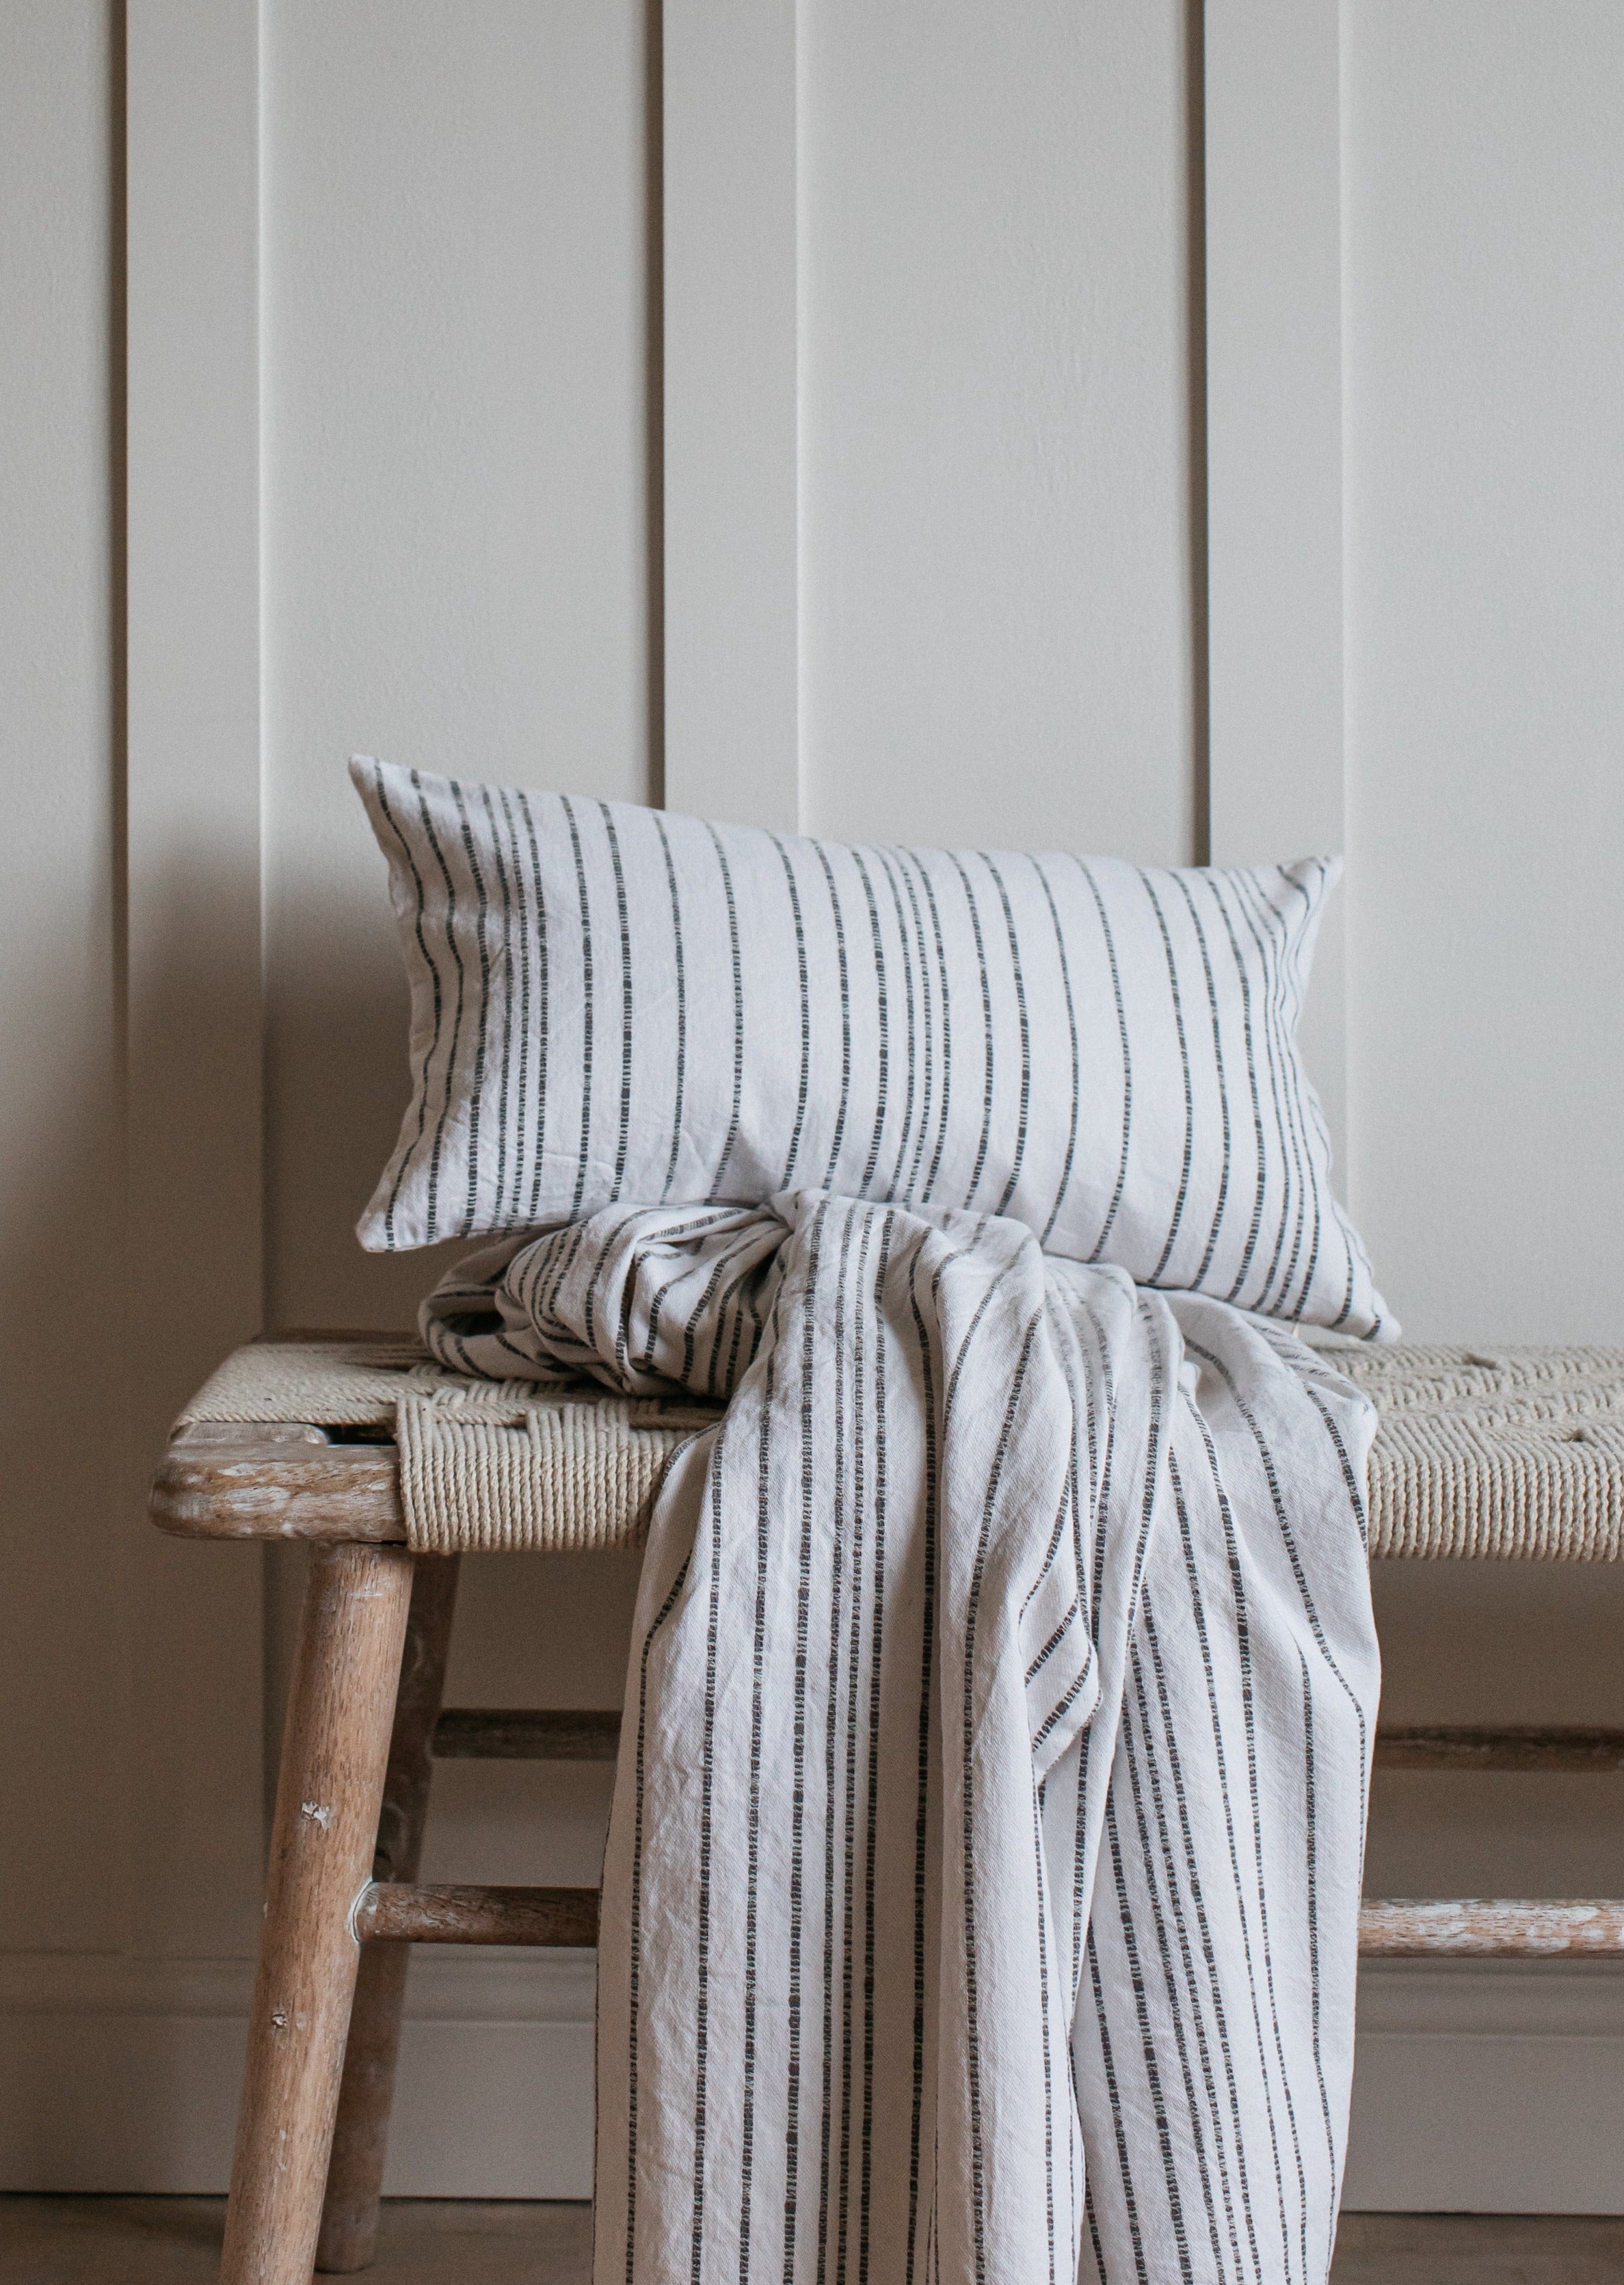 Parkminster Living - our Curated Home Decor, Accessories & Home Fabrics Collections - Scented Candles, Reed Diffusers & Home Fragrance Products - Made in Cornwall